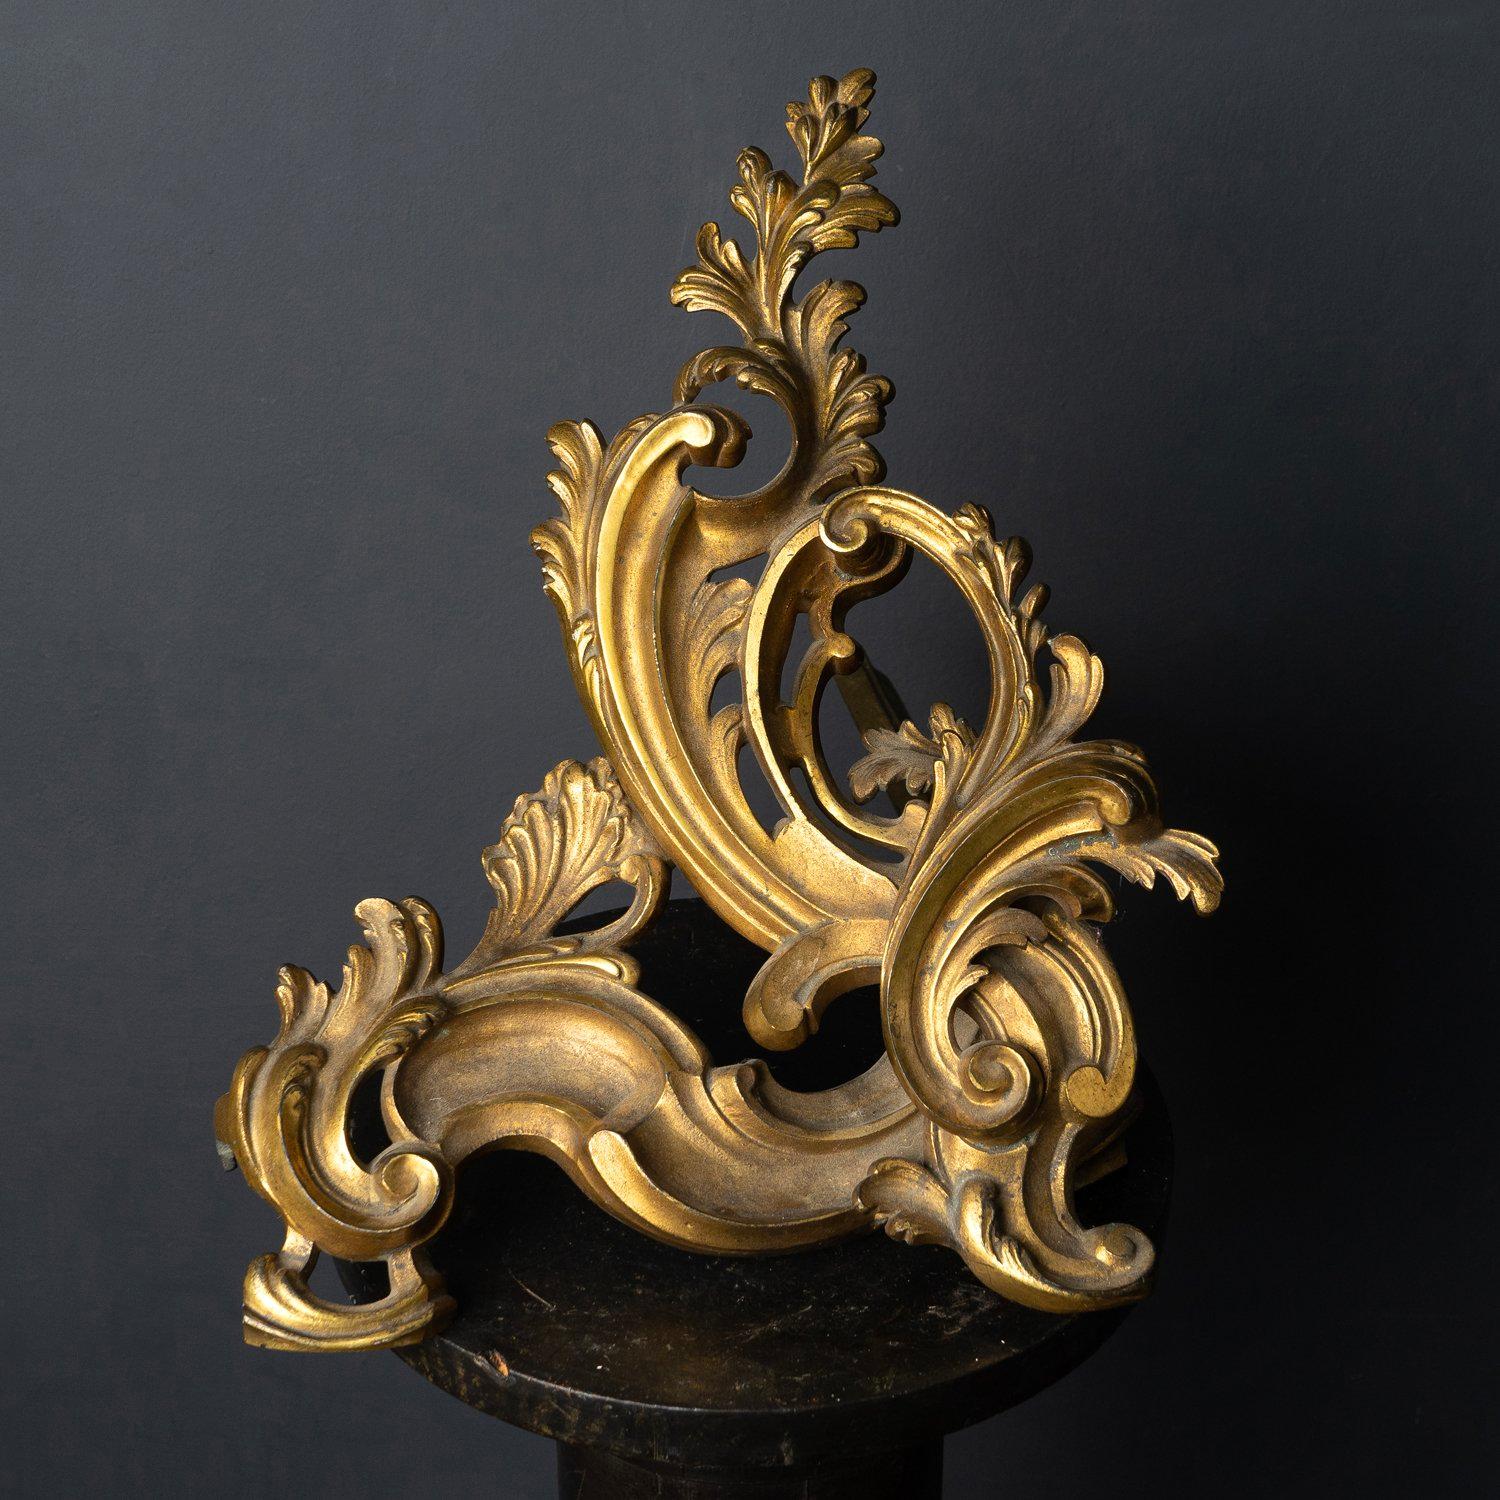 Single Louis XV Style Fireplace Andiron

Single chenet seeks an equally glamorous partner in crime to sit by the fire with. Or failing that, to find someone who only needs one.
Flowing rococo style andiron modelled in a naturalistic form gilt